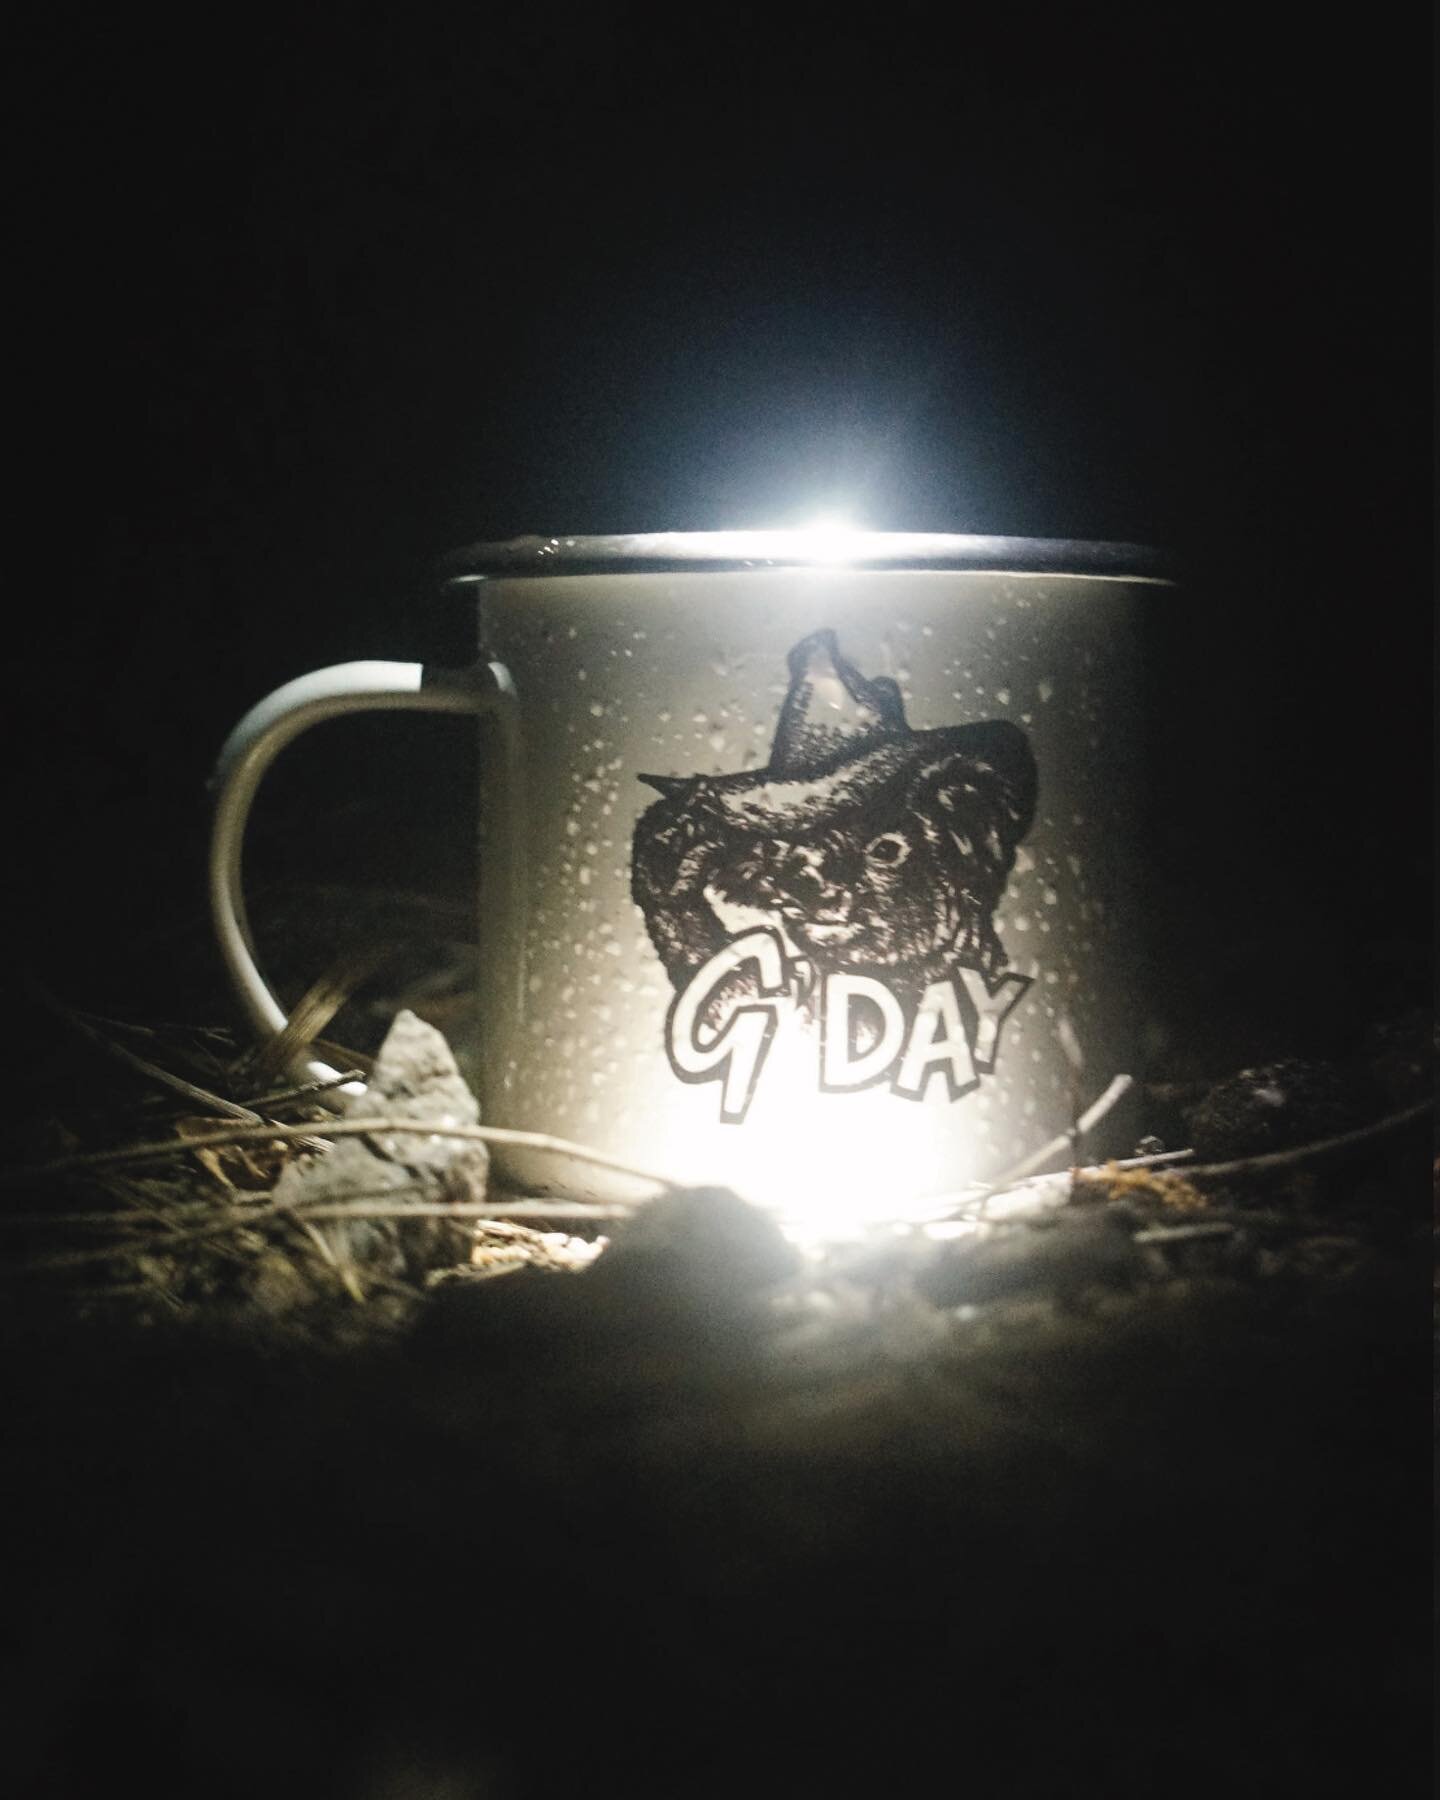 G&rsquo;Day! The perfect vessel for a cheeky night rum or an early morning cuppa joe. 

#adventure #hiking #mountians #wandering #roadslesstravelled #parksco #campfire #camping #weekendwarrior #sea #ocean #seatosummit #enjoytherideleavenothingbehind 